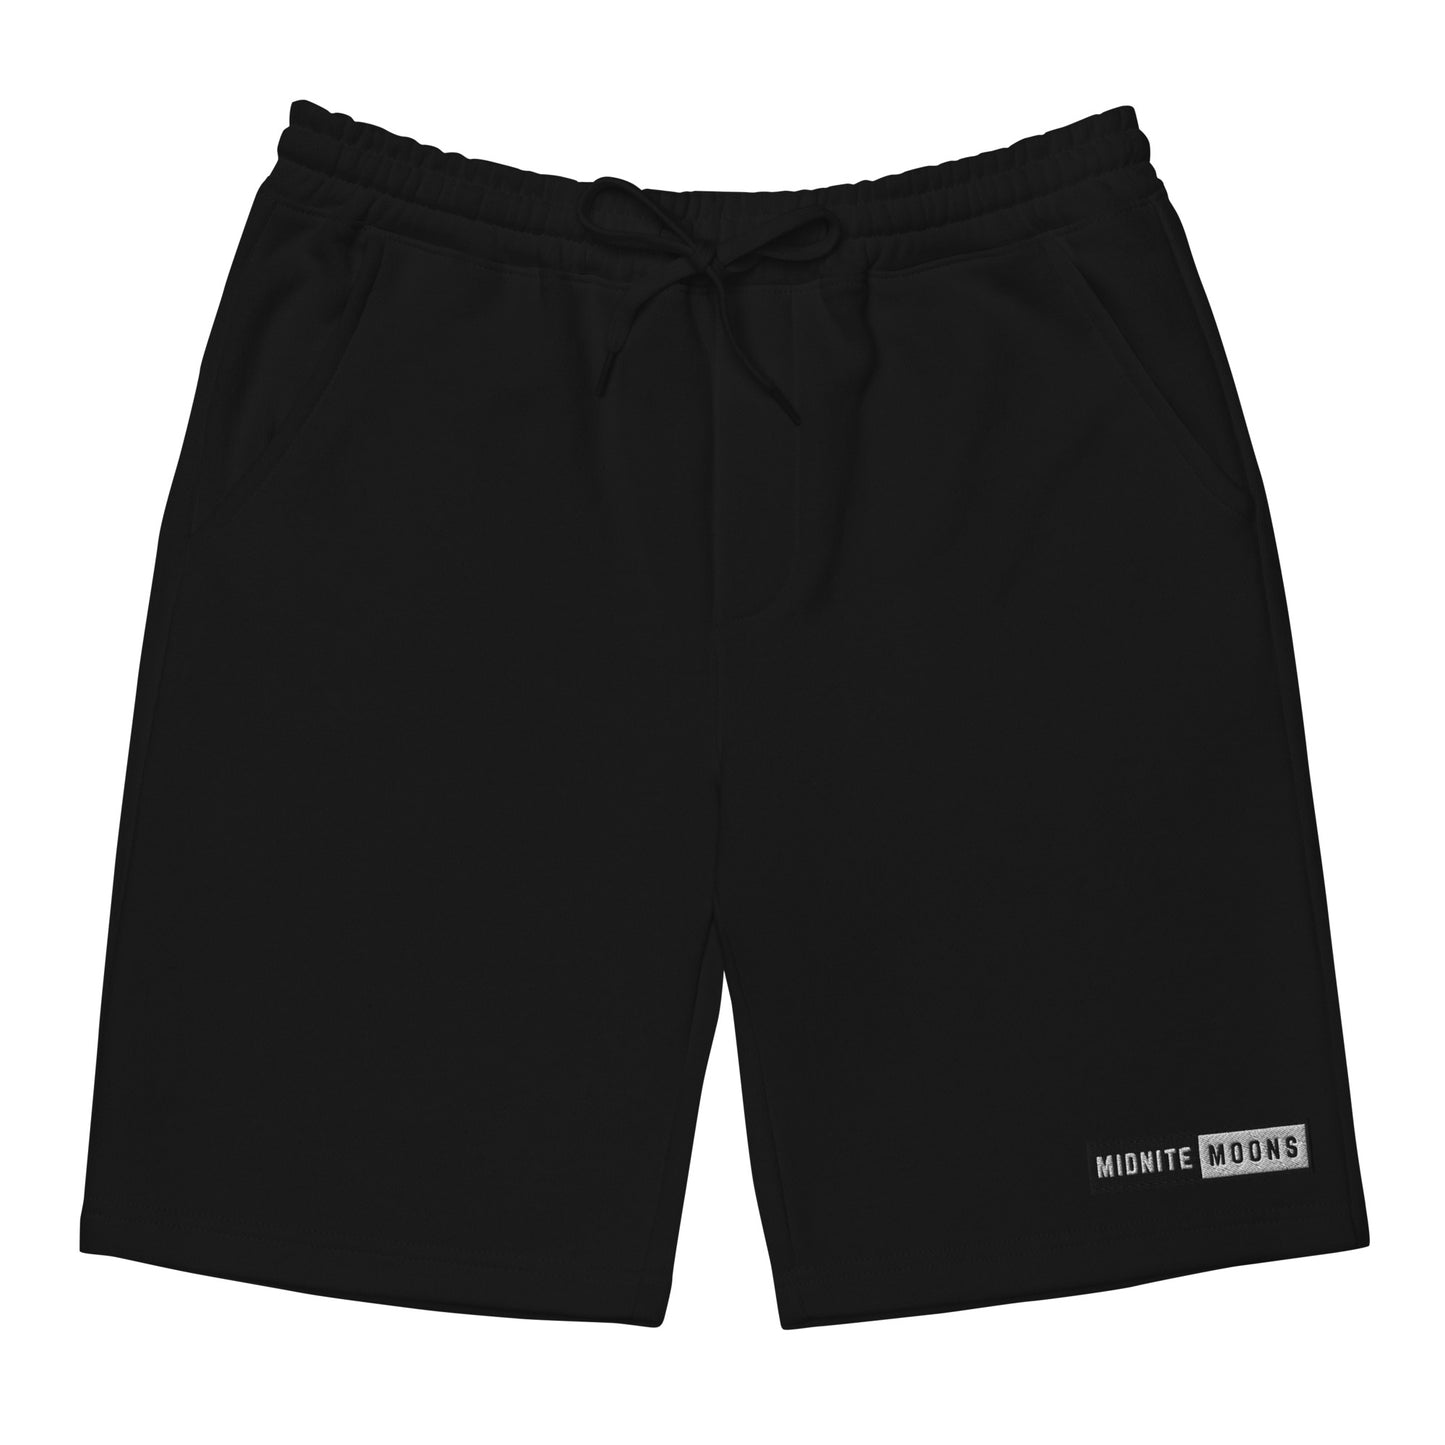 Midnite Moons | Shorts (Embroidered)